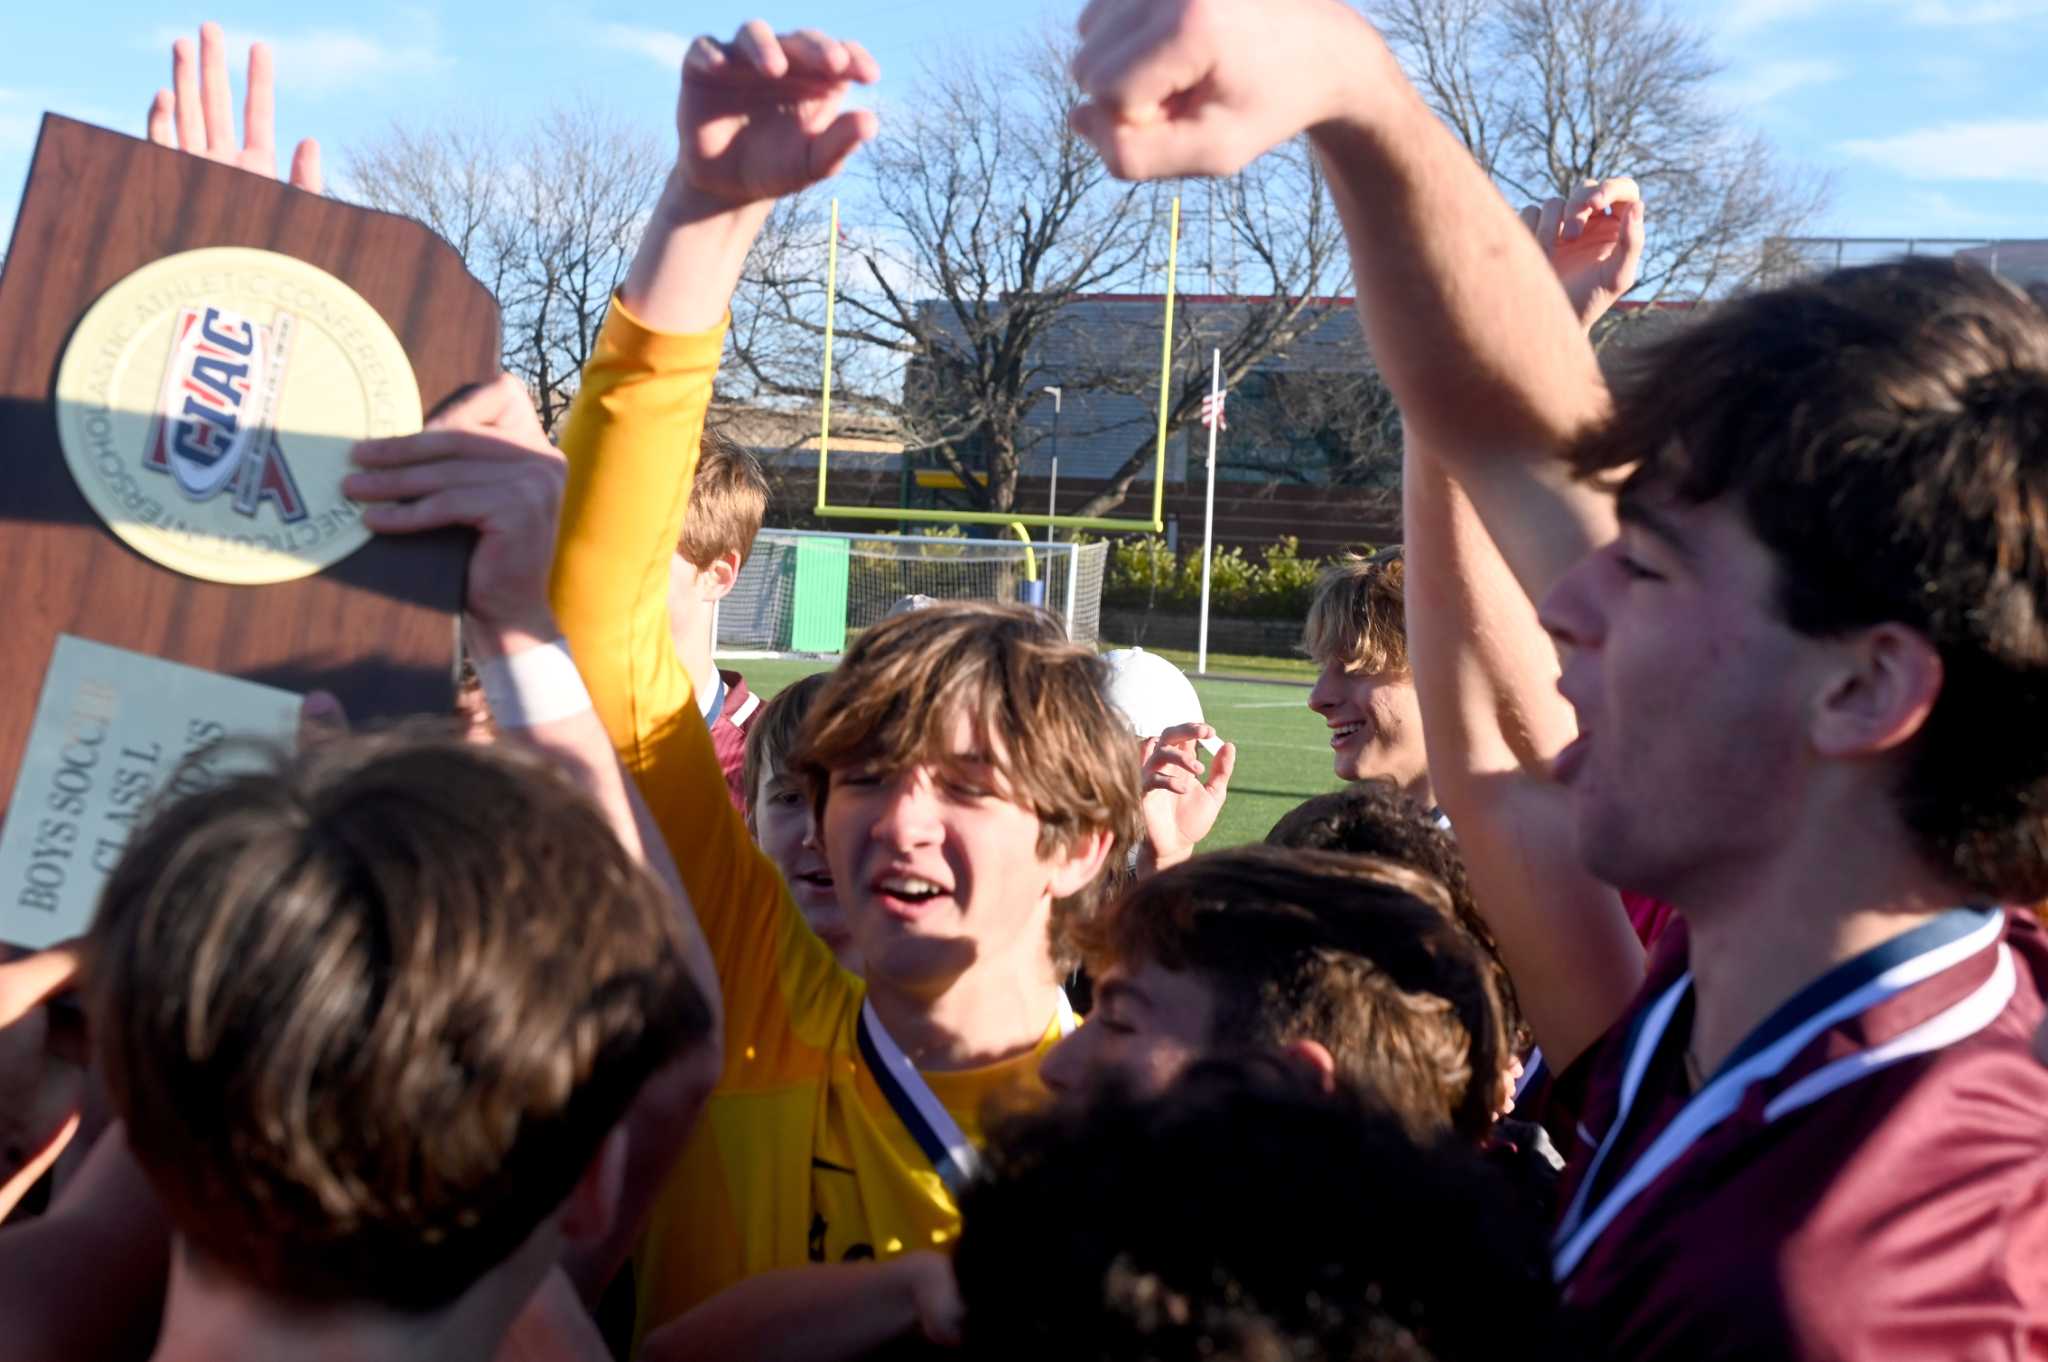 Liberty and Norwalk are set to meet in Saturday's Class 3A boys state soccer  championship game